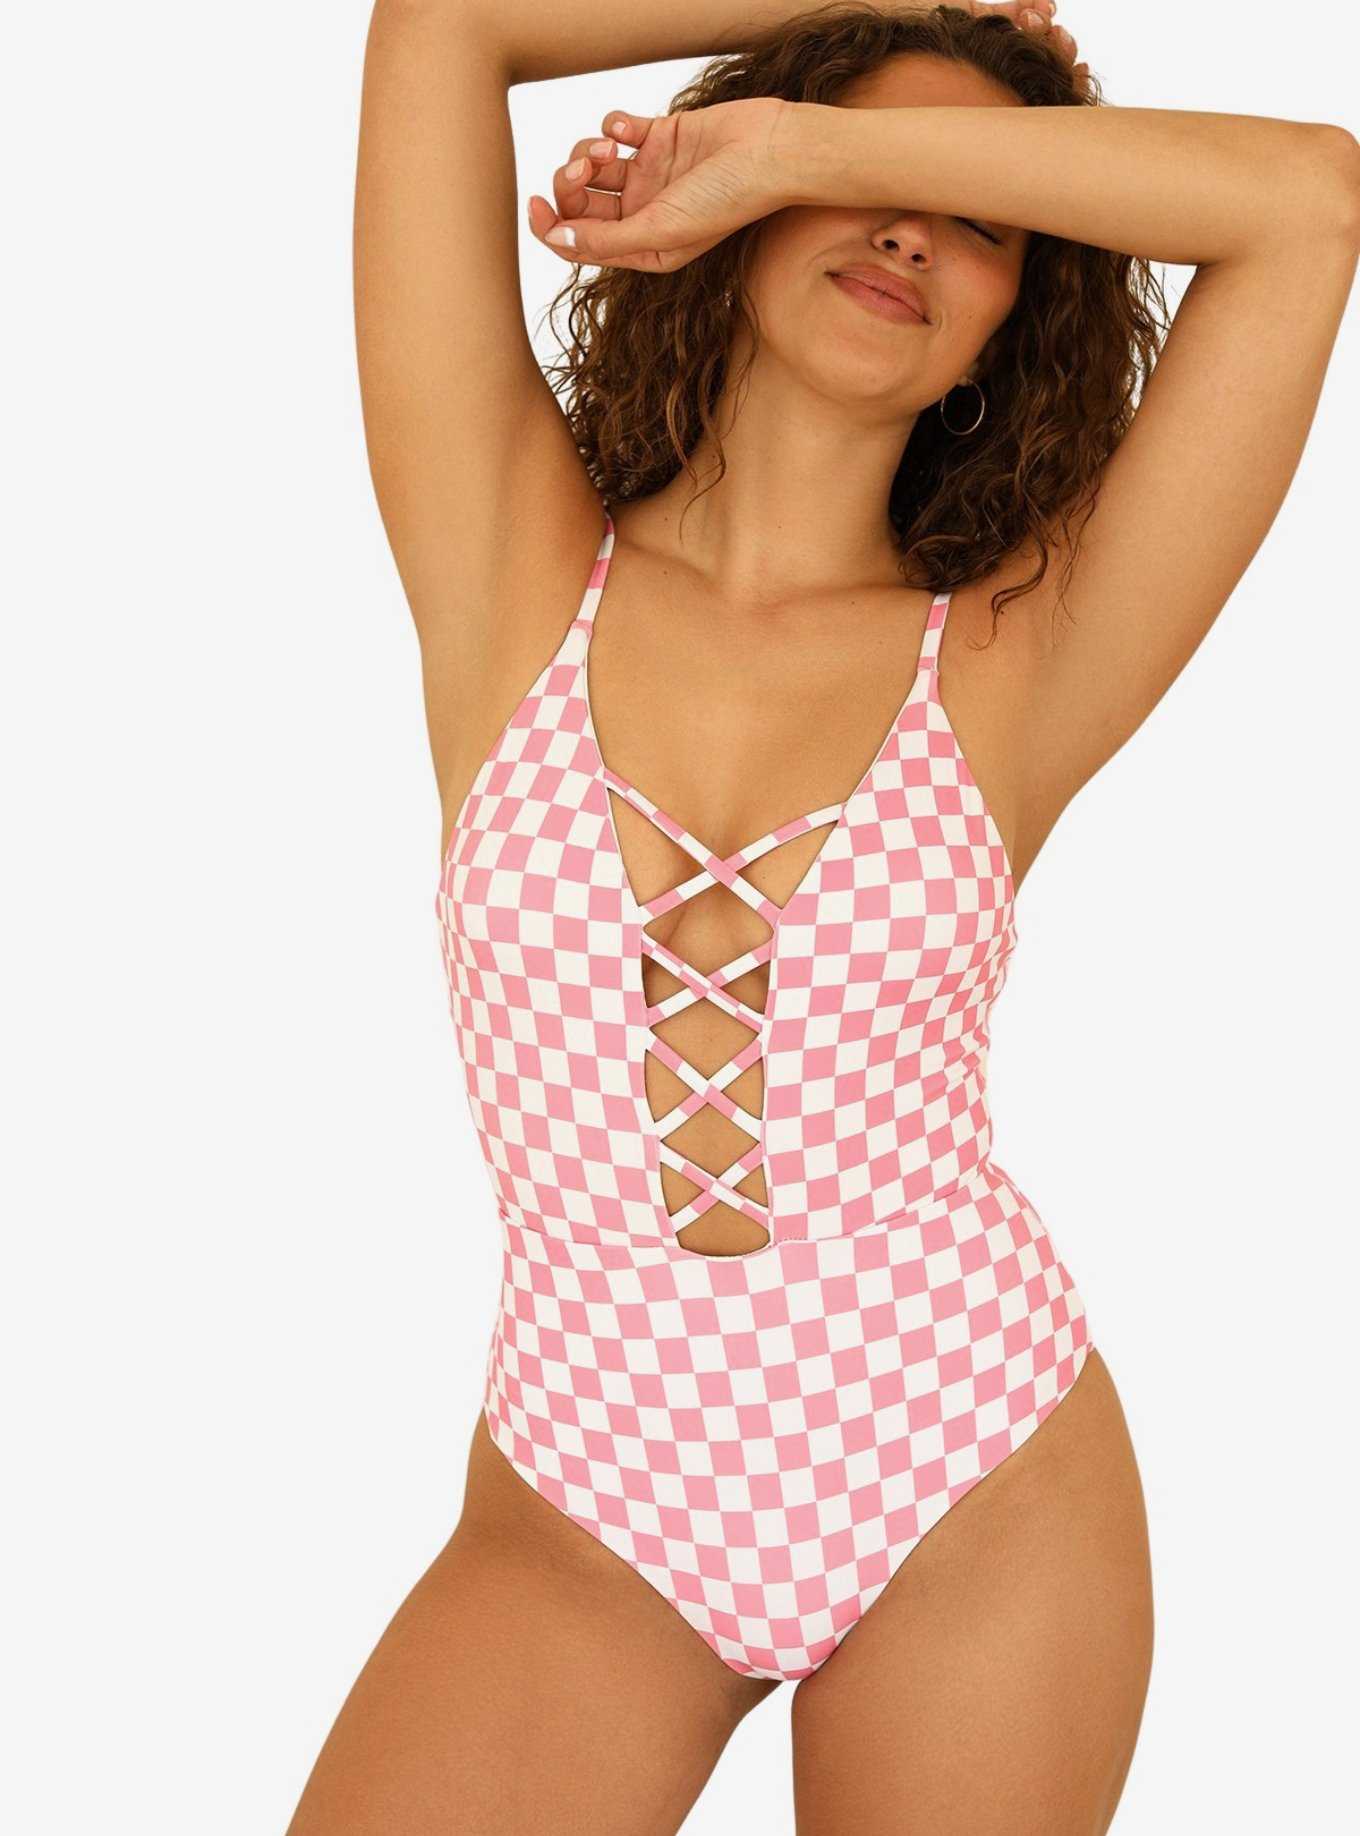 KIBYS ROCKY Cut-out One-piece Swimsuit - White